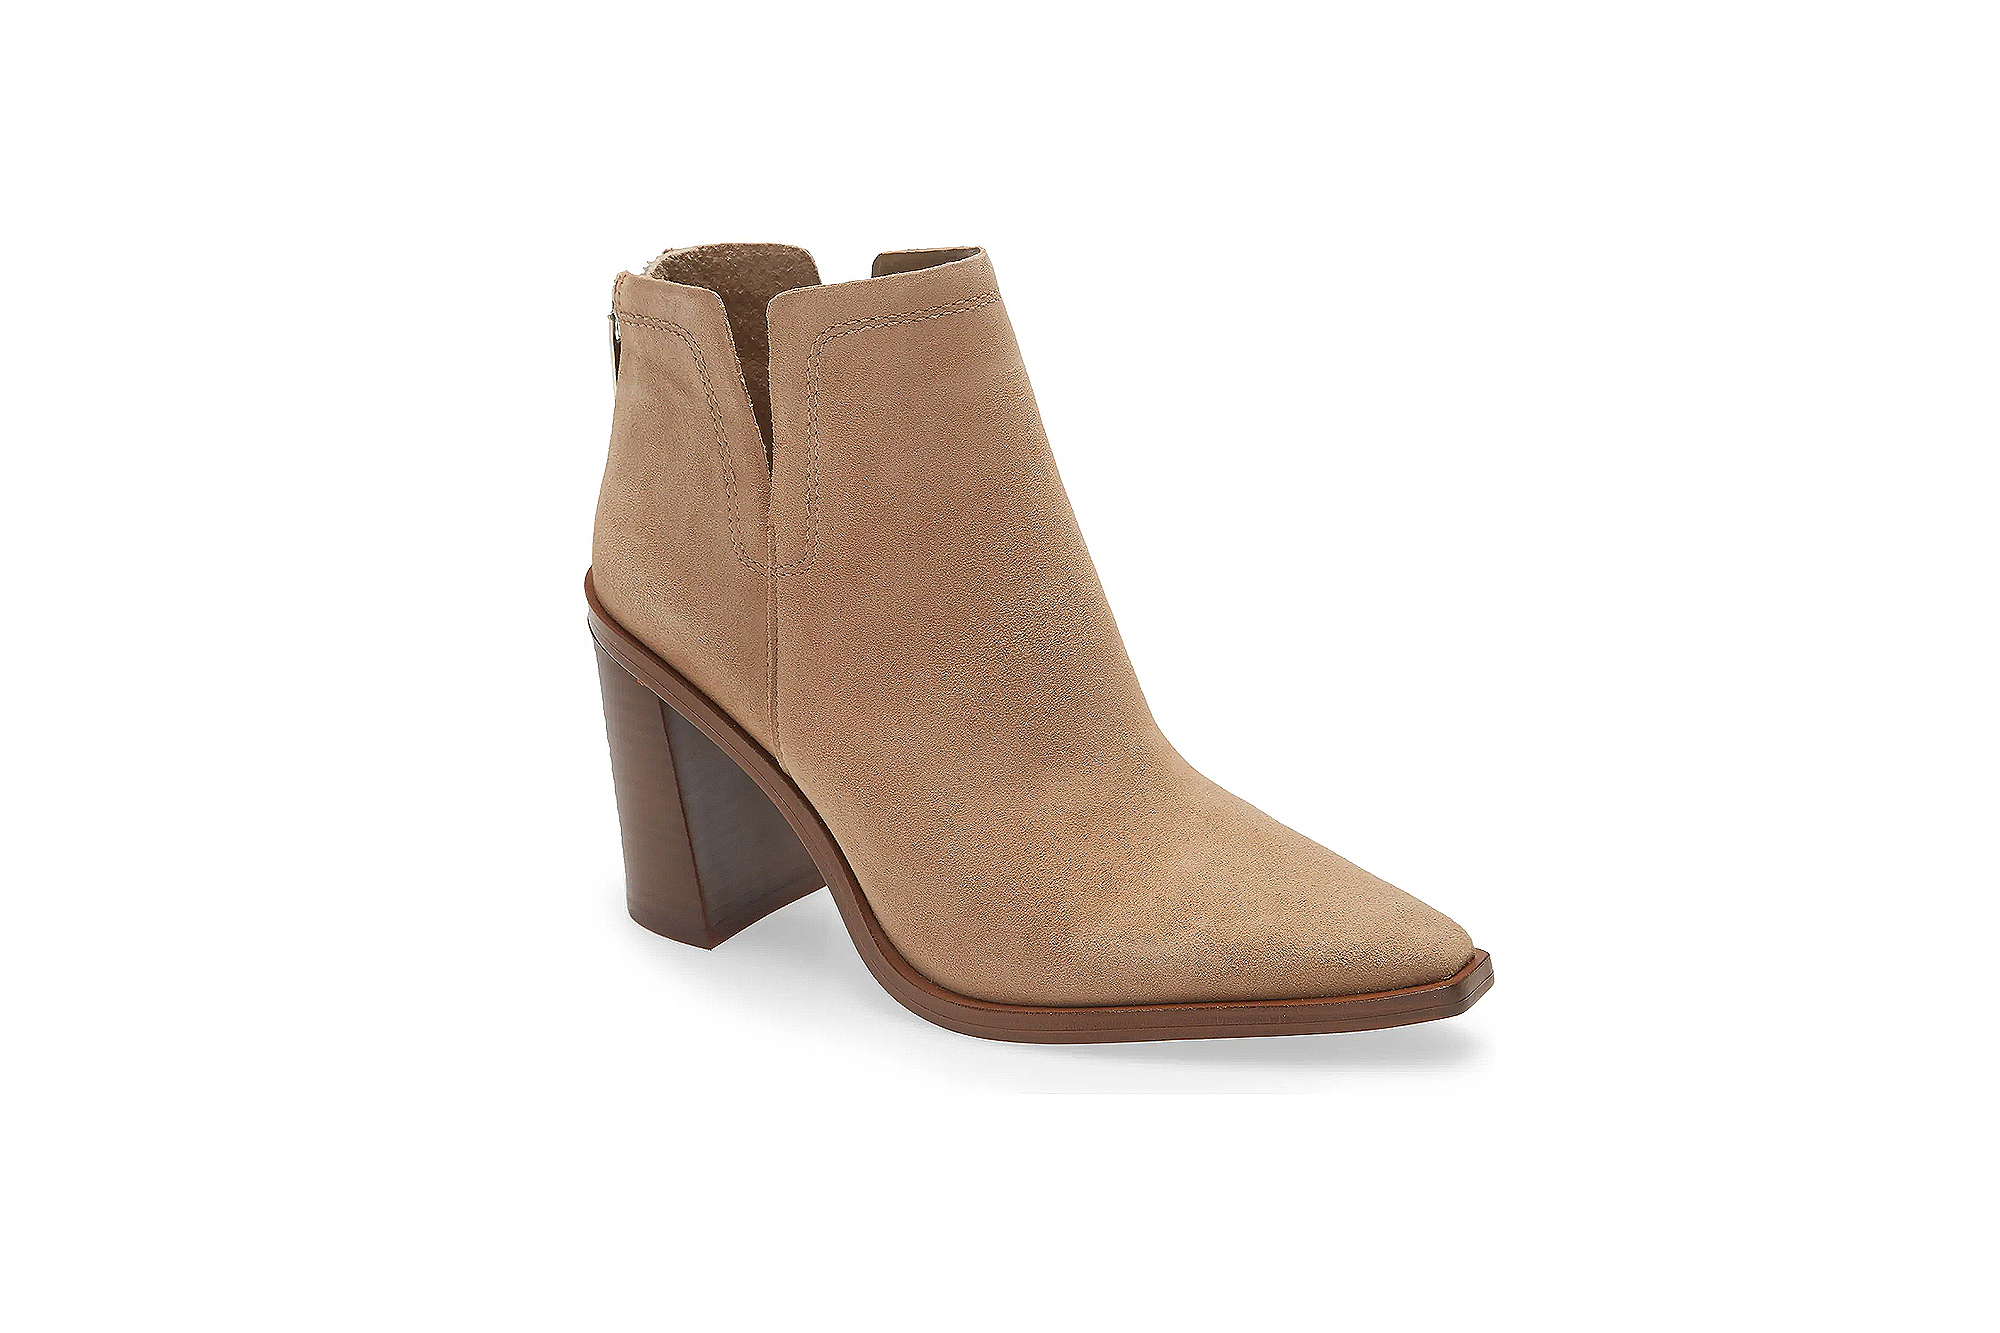 Vince Camuto Booties Are 60% Off — We Want Them in Every Color